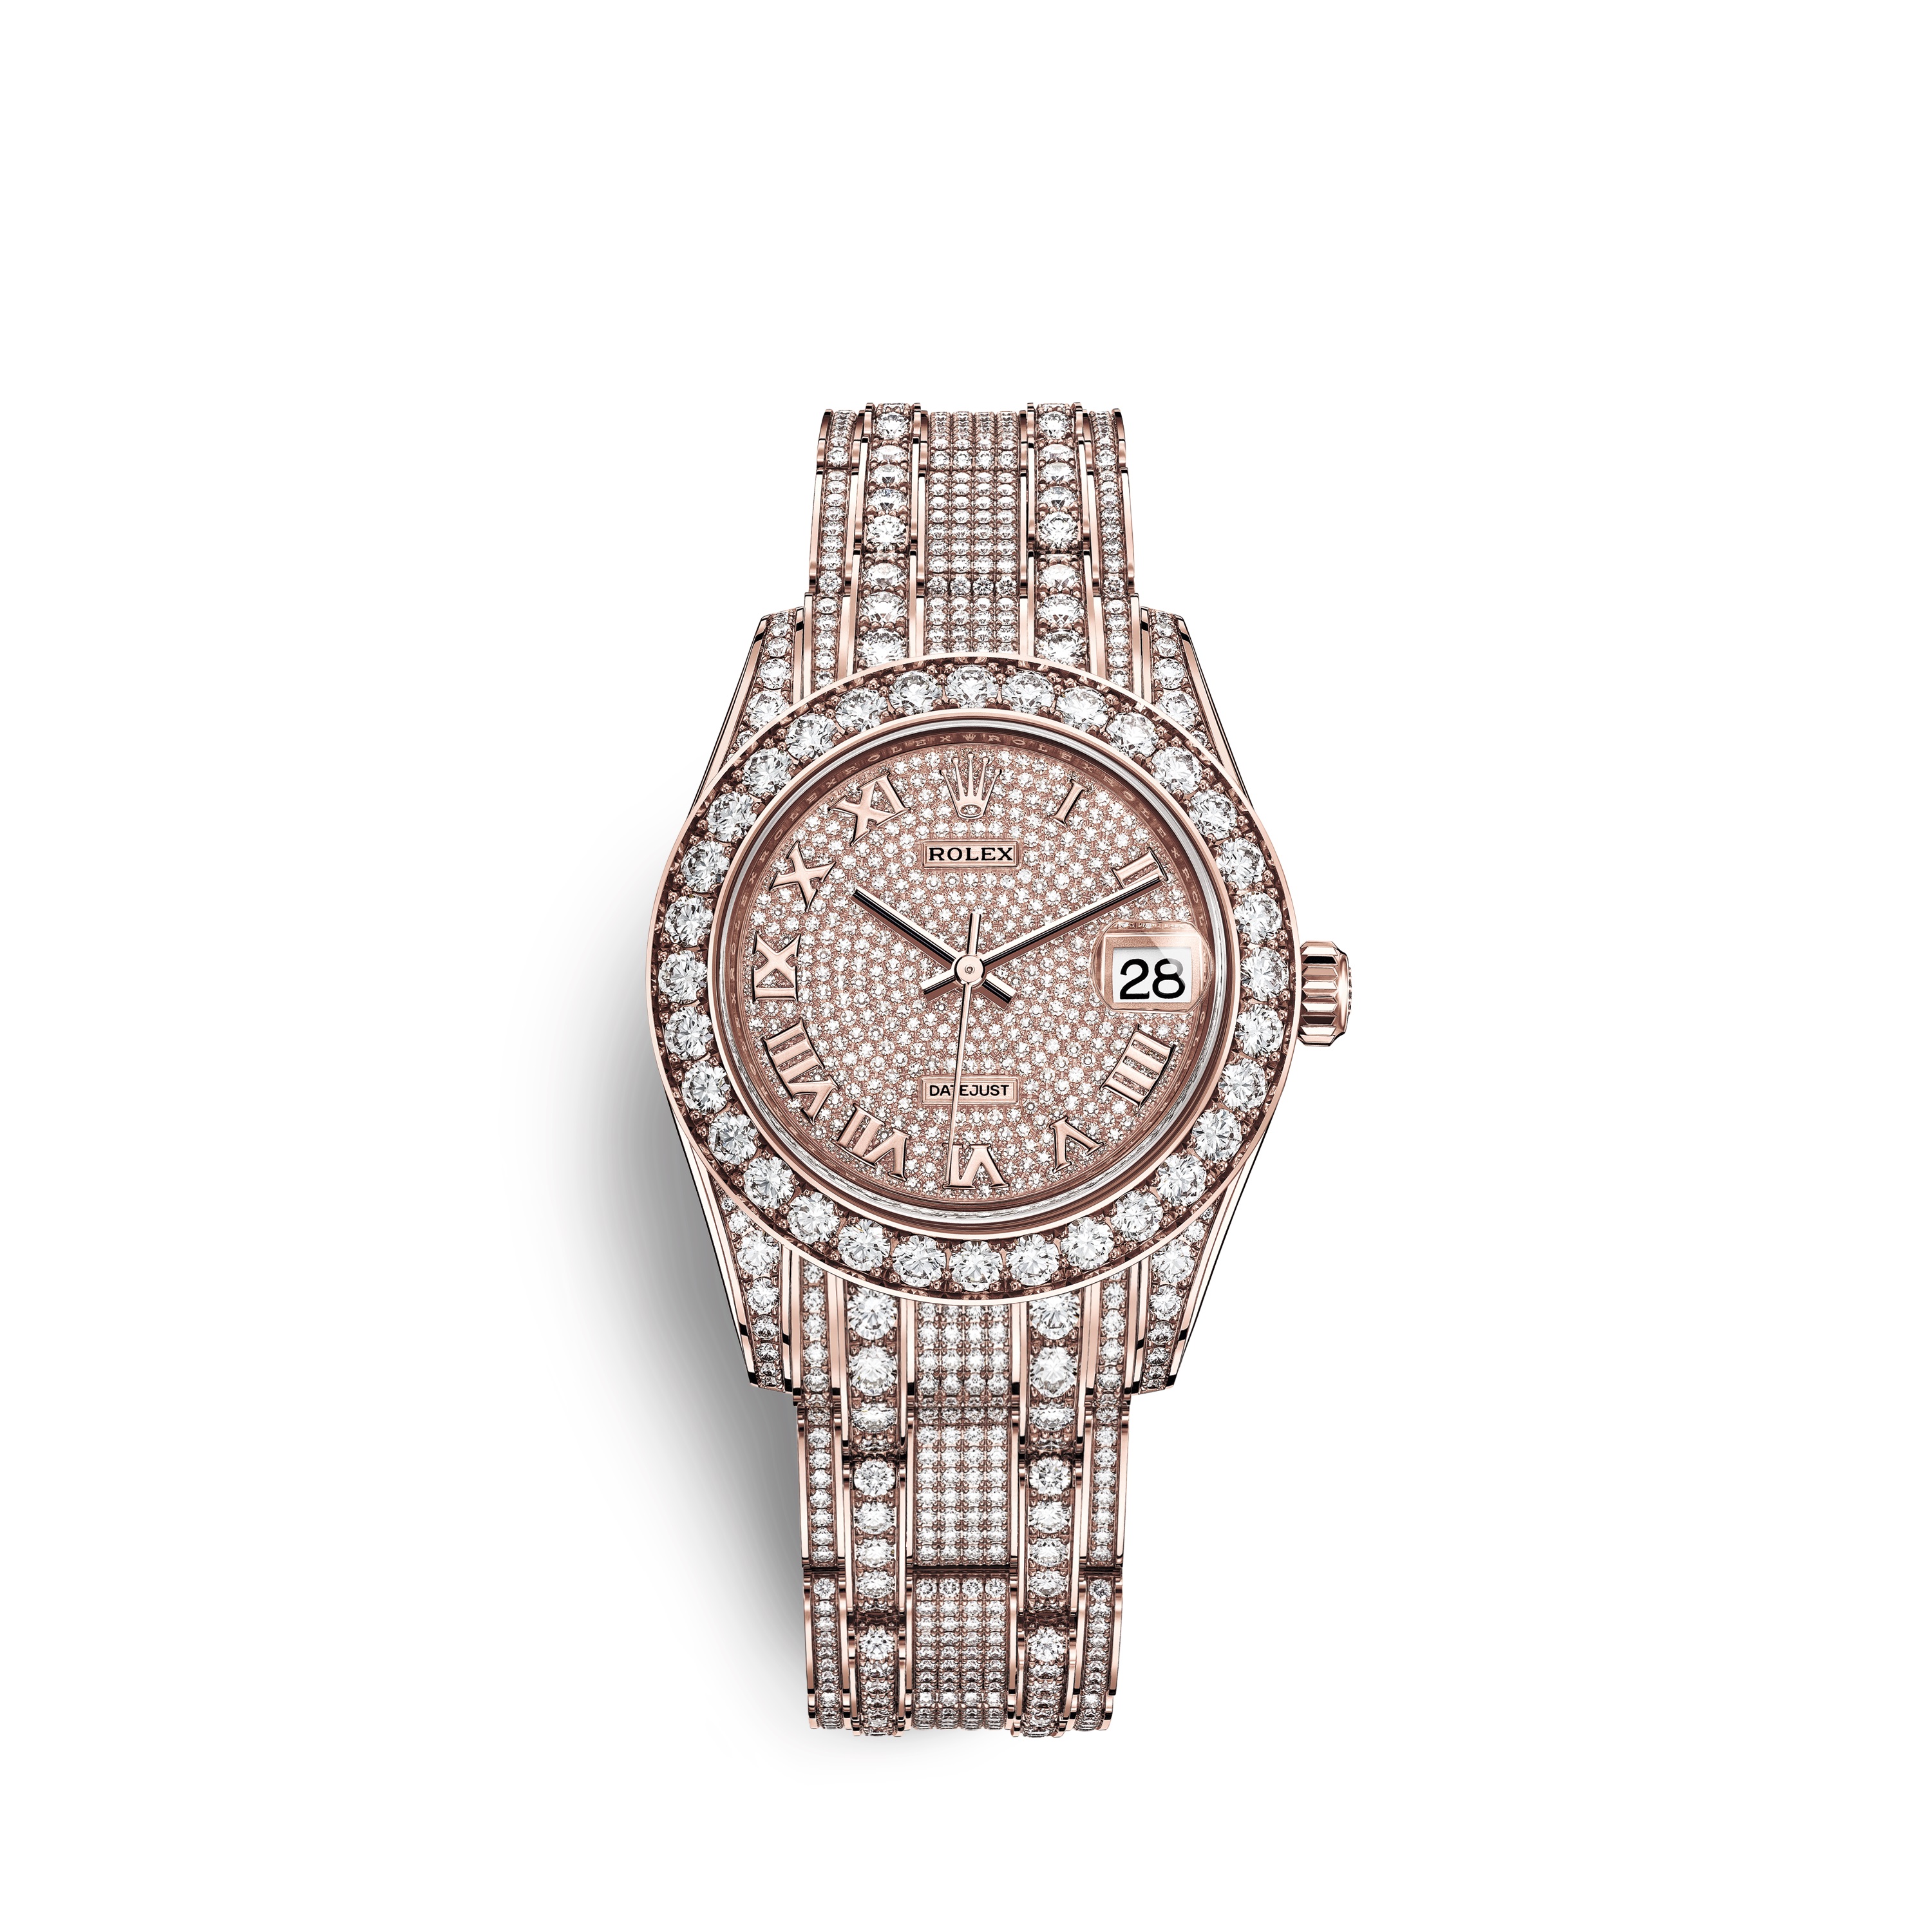 Pearlmaster 34 81405RBR Rose Gold and Diamonds Watch (Diamond-Paved)